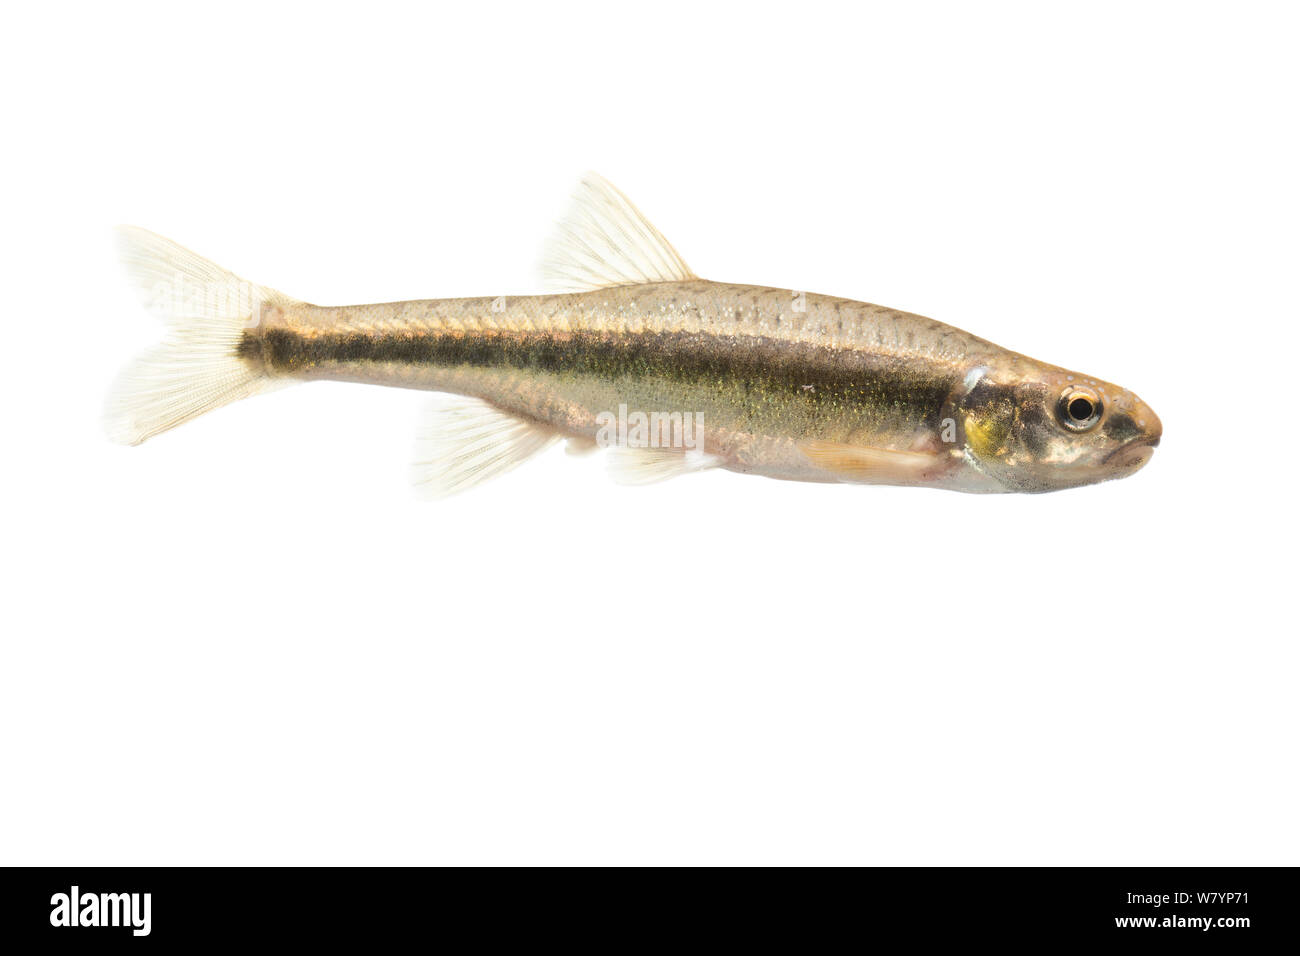 Know Your Pond Life: A Minnow is a Minnow, or is it? - American Sport Fish